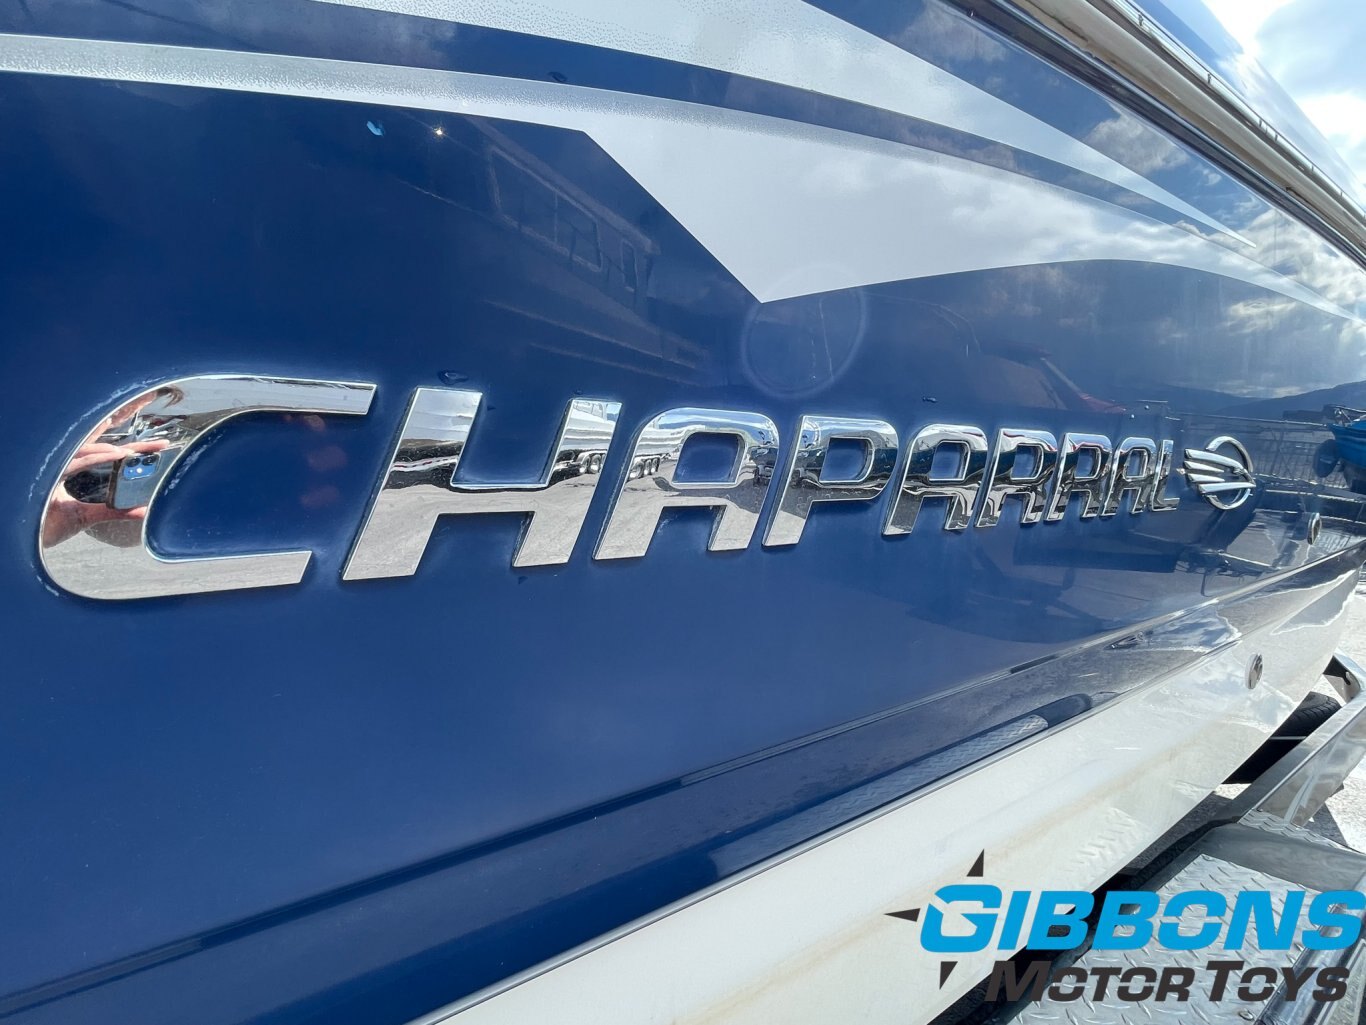 2007 Chaparall 256 SSi